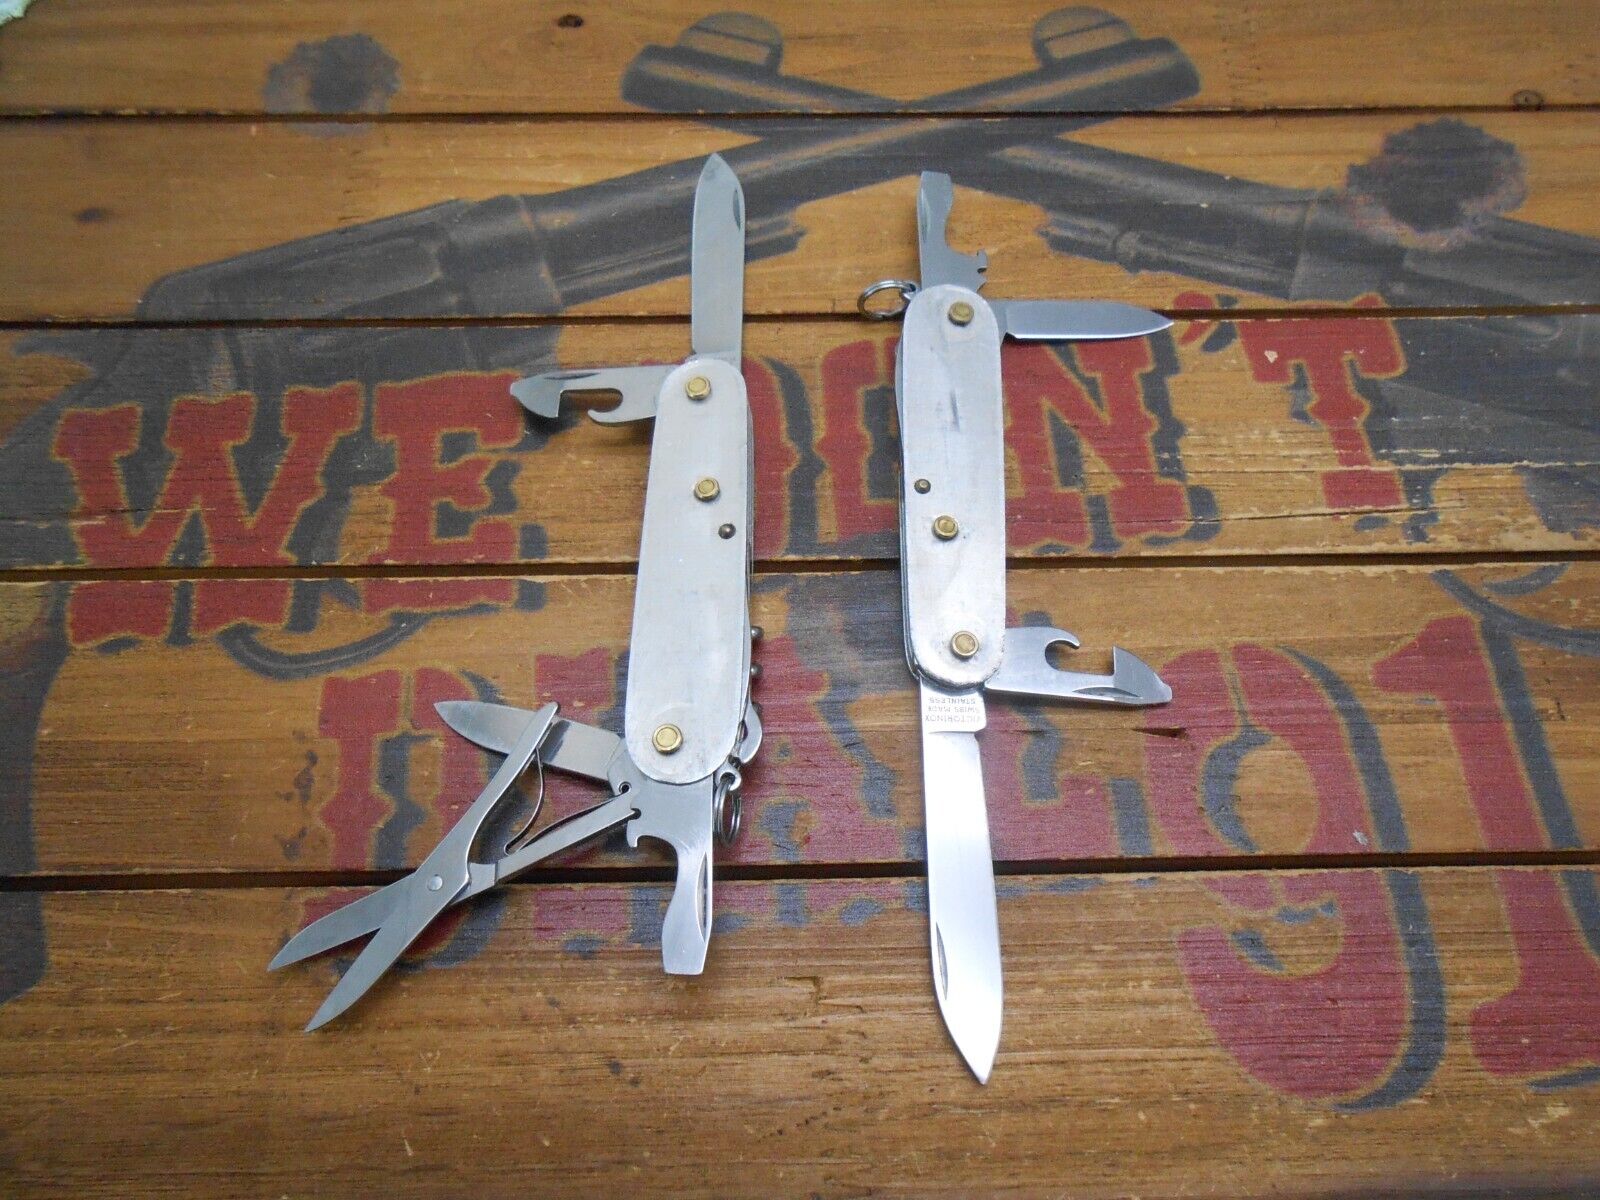 Lot of 2 Victorinox Swiss Army Knives Climber & Tinker No Scales